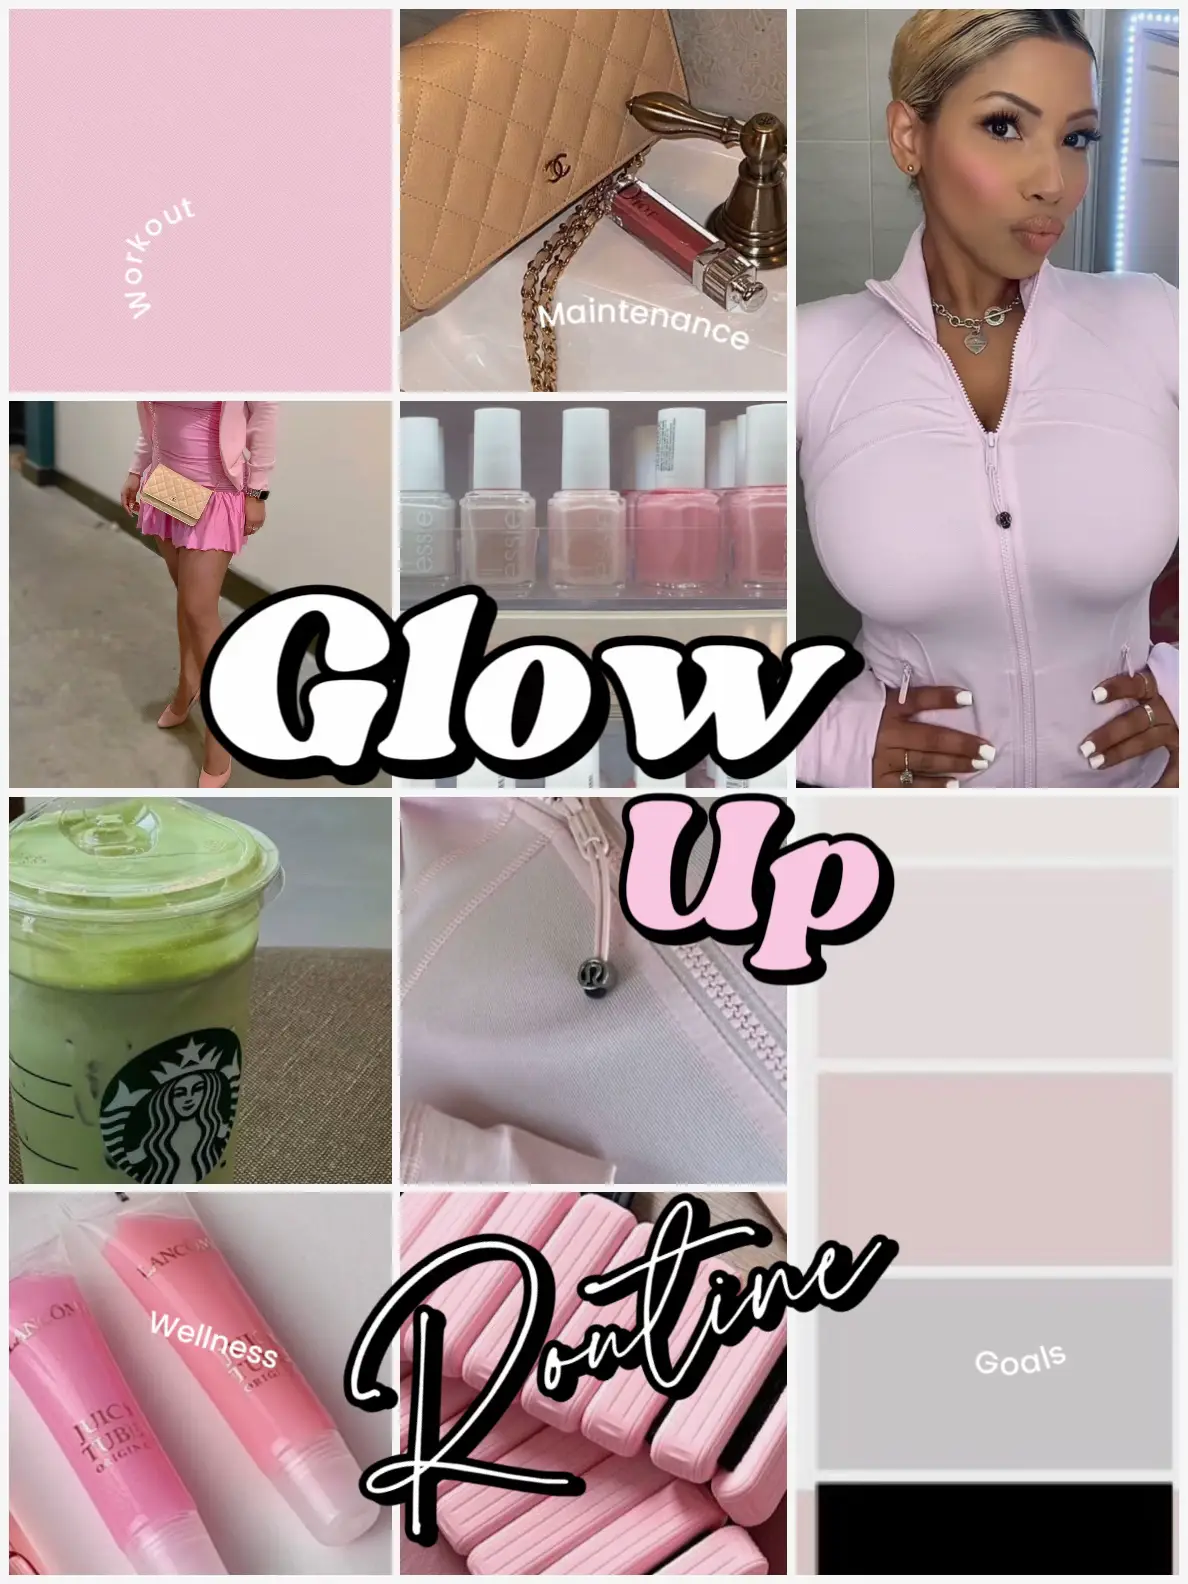 2024 Glow Up Planner: Self Care Planner, Fitness Journal, Skincare